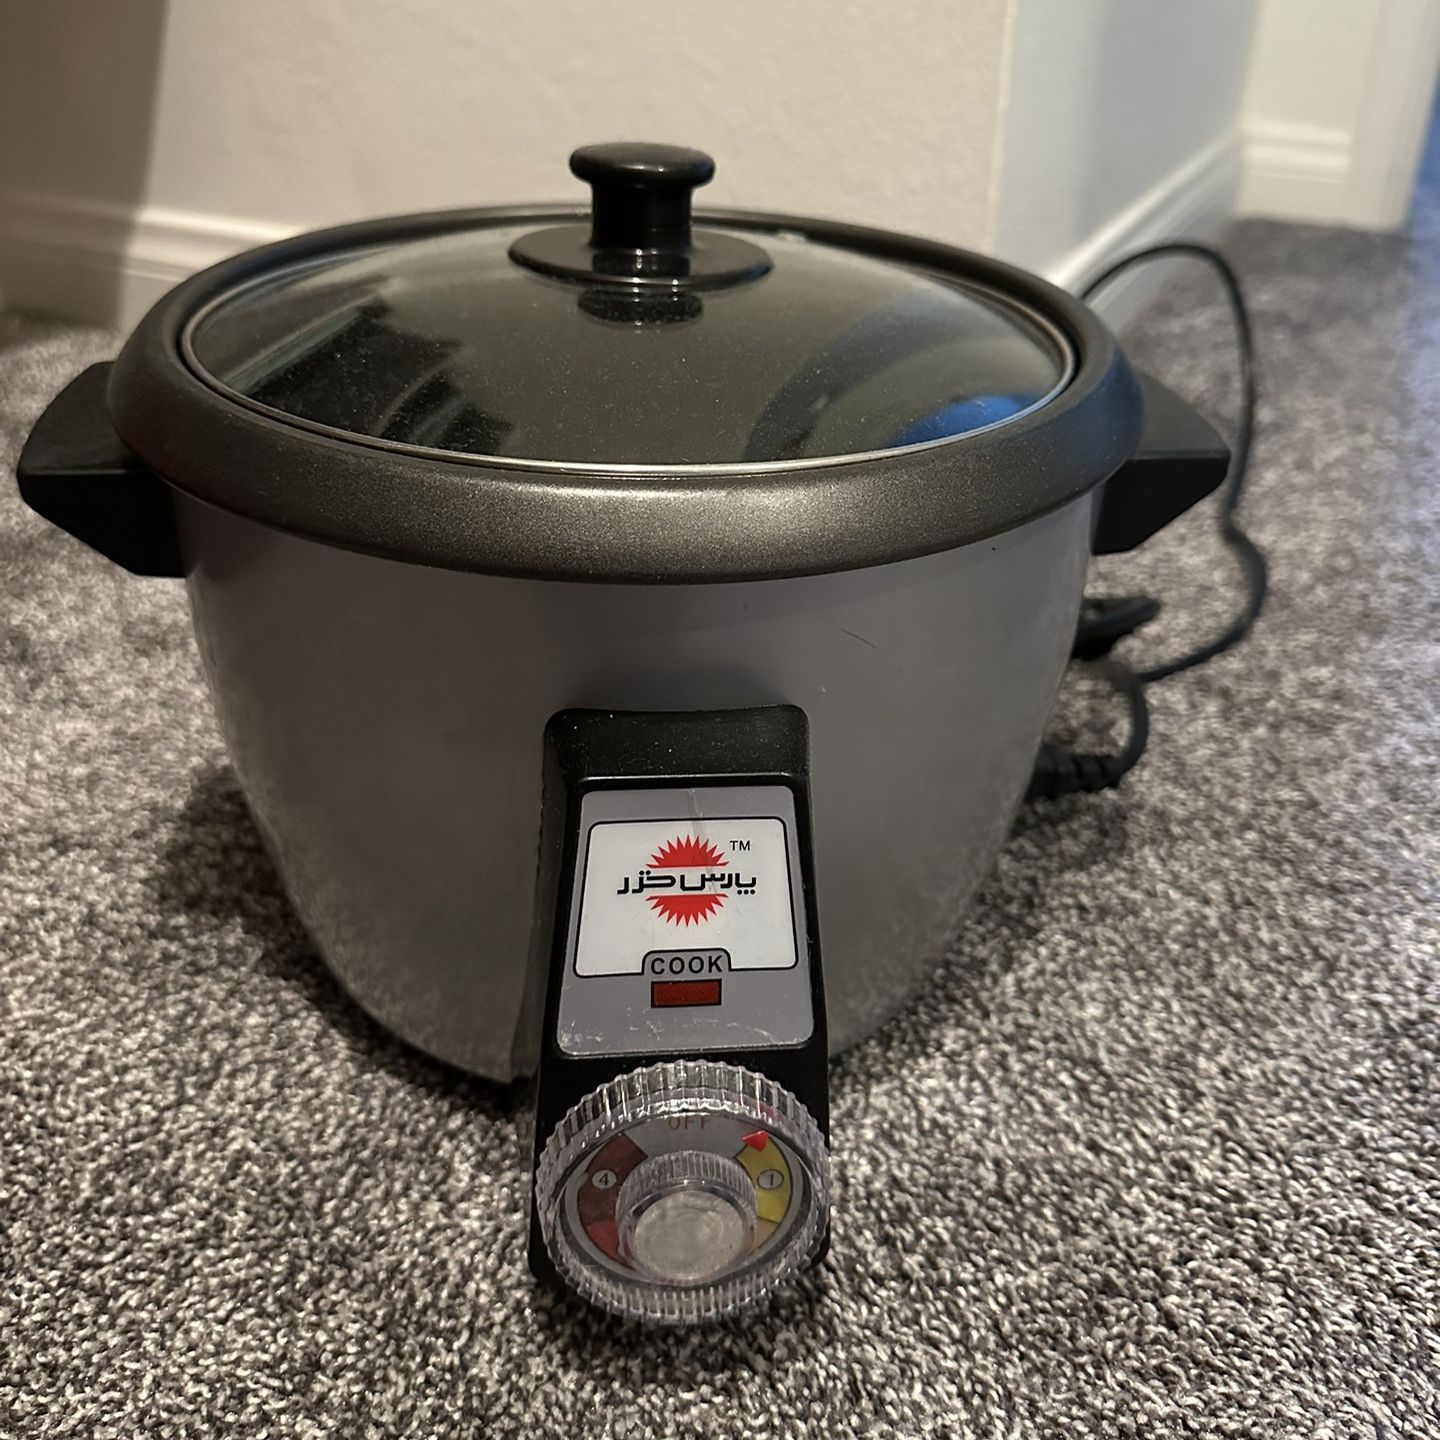 Pars Automatic Persian Rice Cooker (3 Cup)